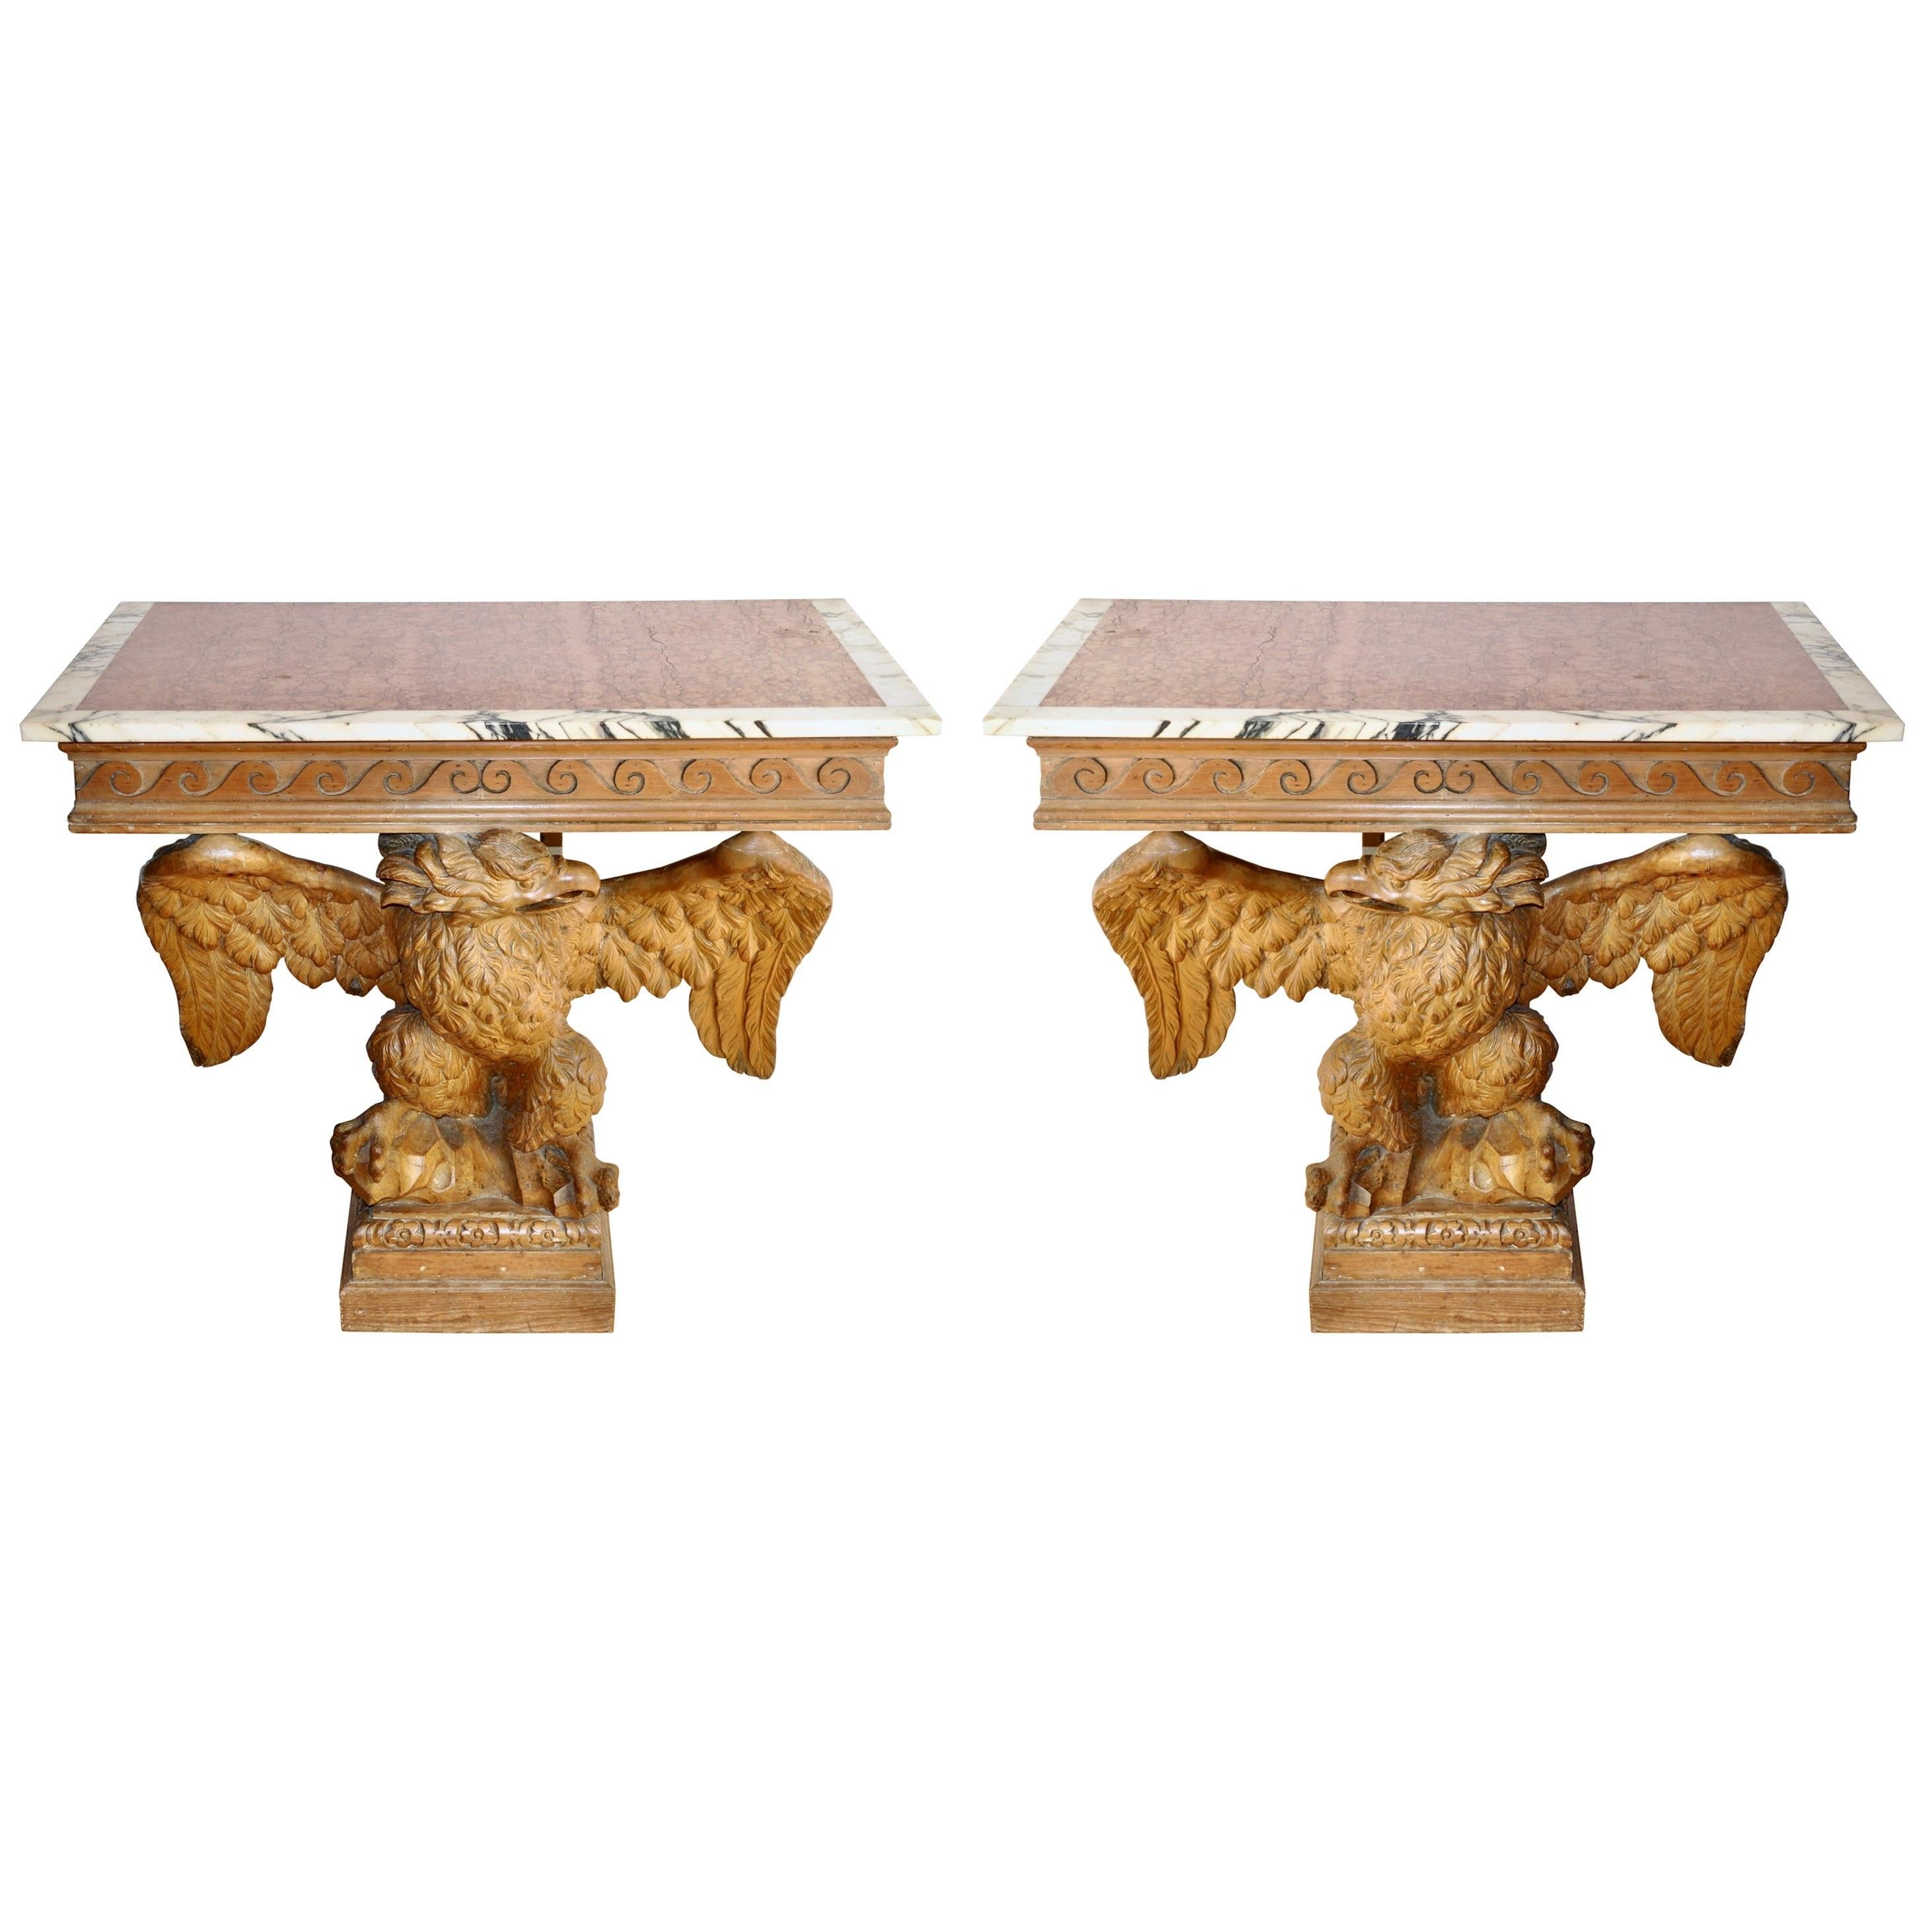 Pair of 18th Century Stripped Pine Eagle Console Tables, Manner of William Kent